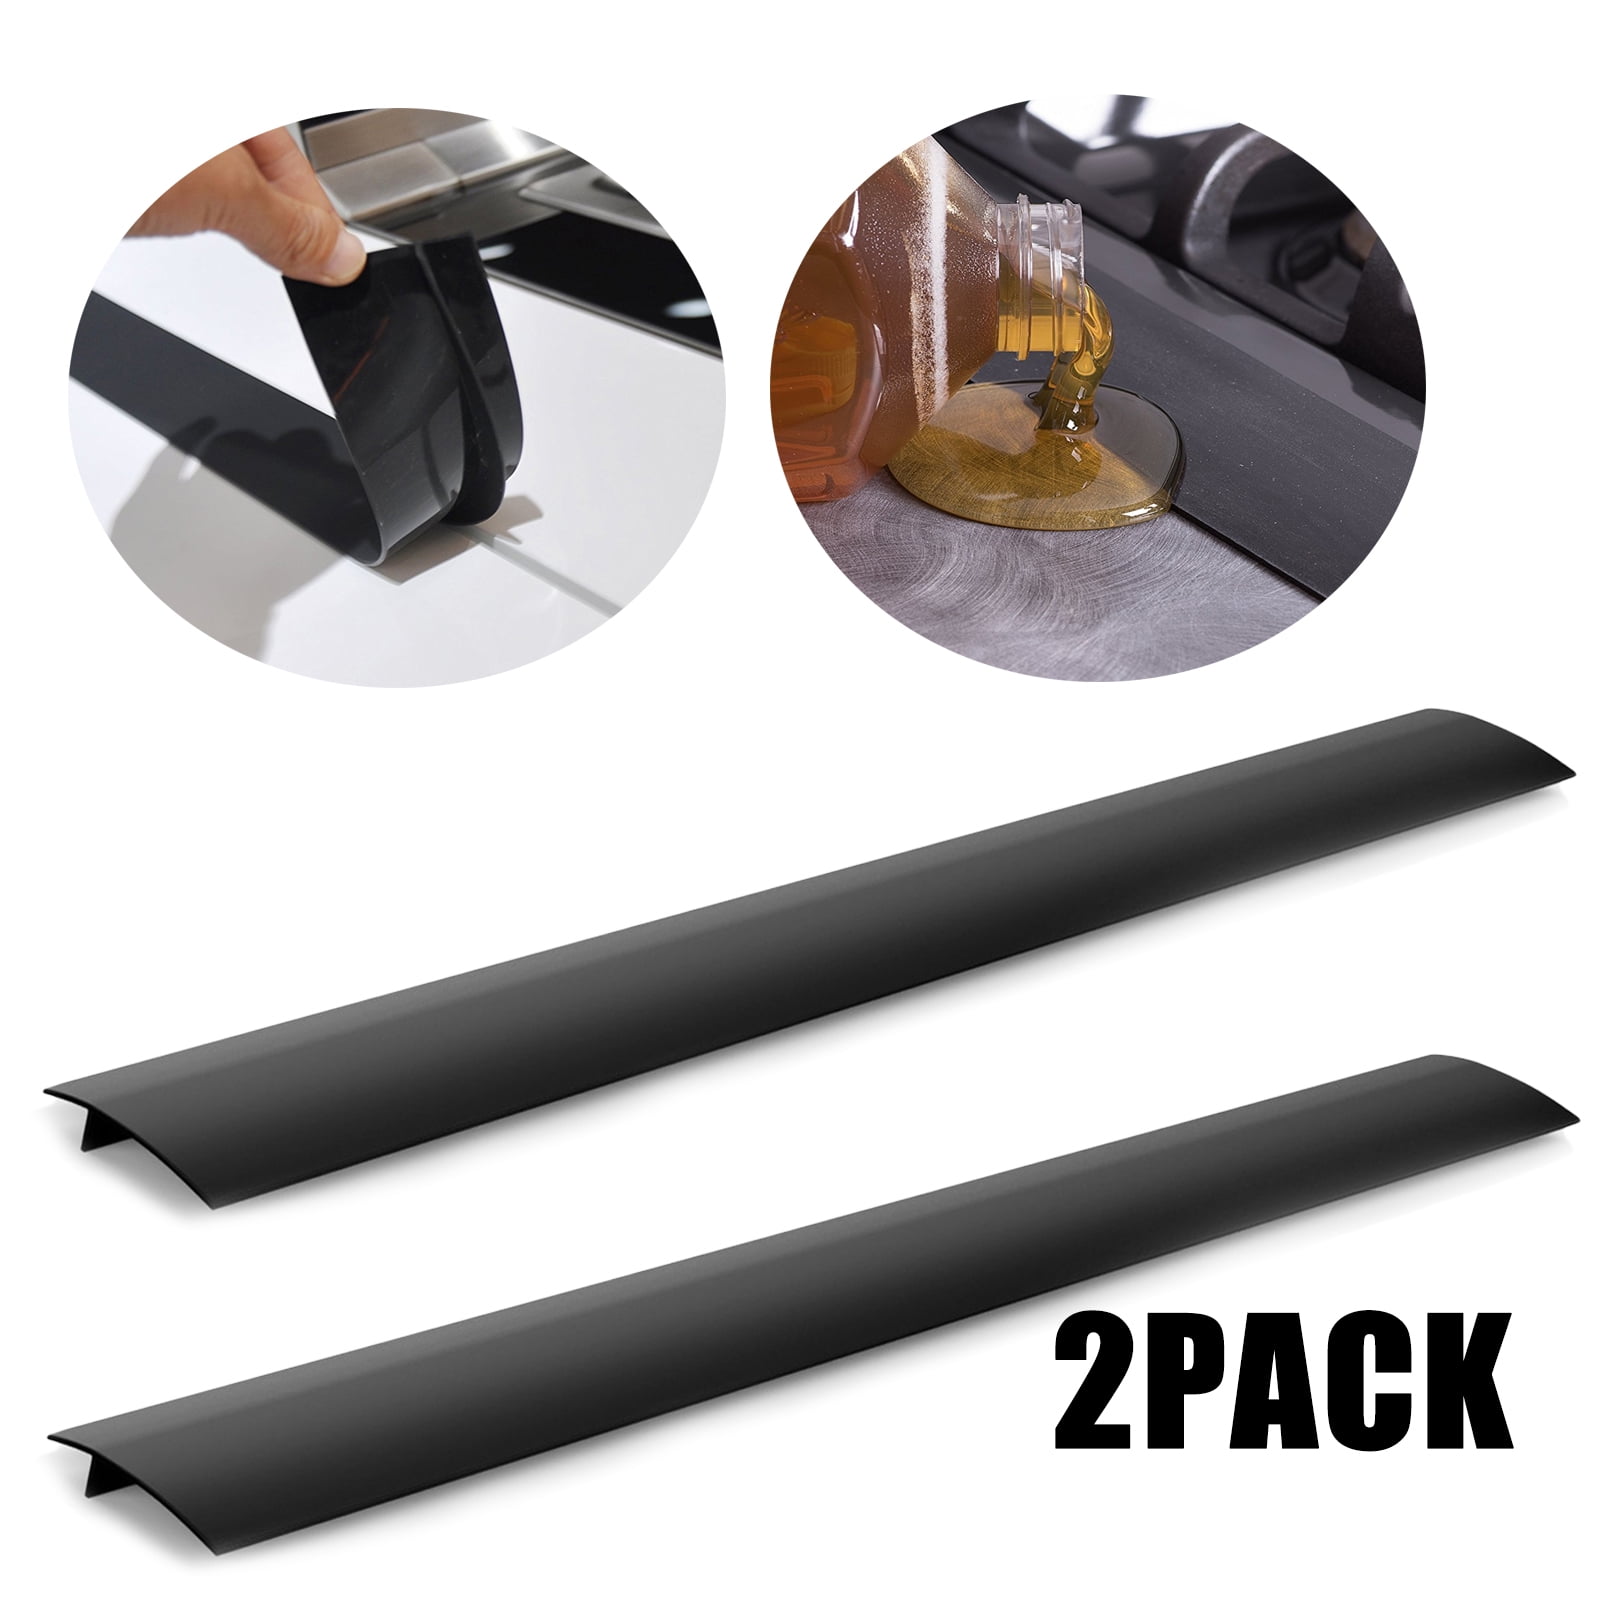 TSV 2pcs Kitchen Silicone Gap Covers, 21 Gap Fillers Stove Counter Gap  Covers, T-Shaped, Black